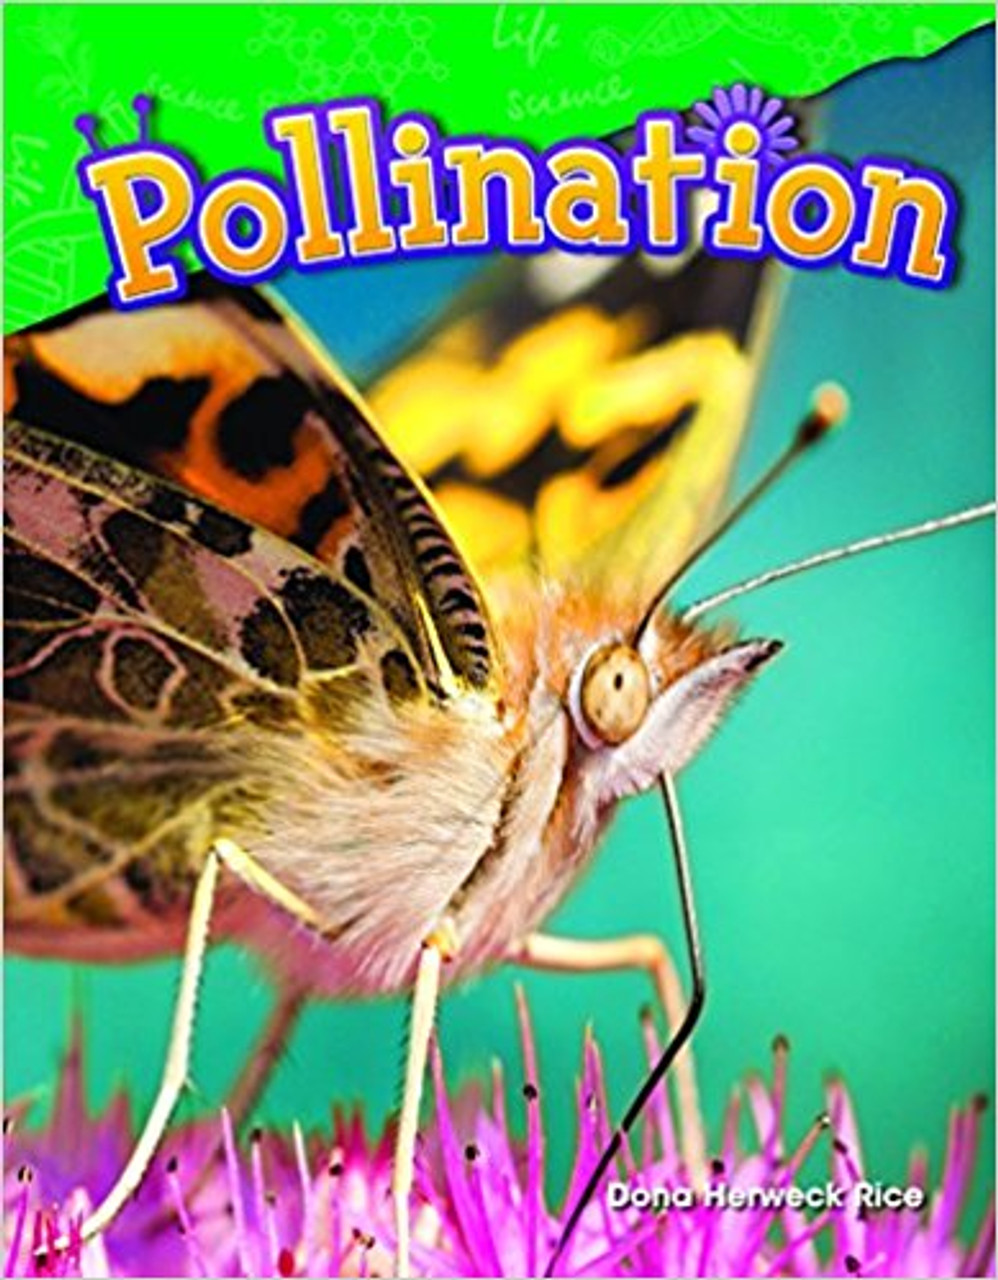 Pollination by Dona Herweck Rice